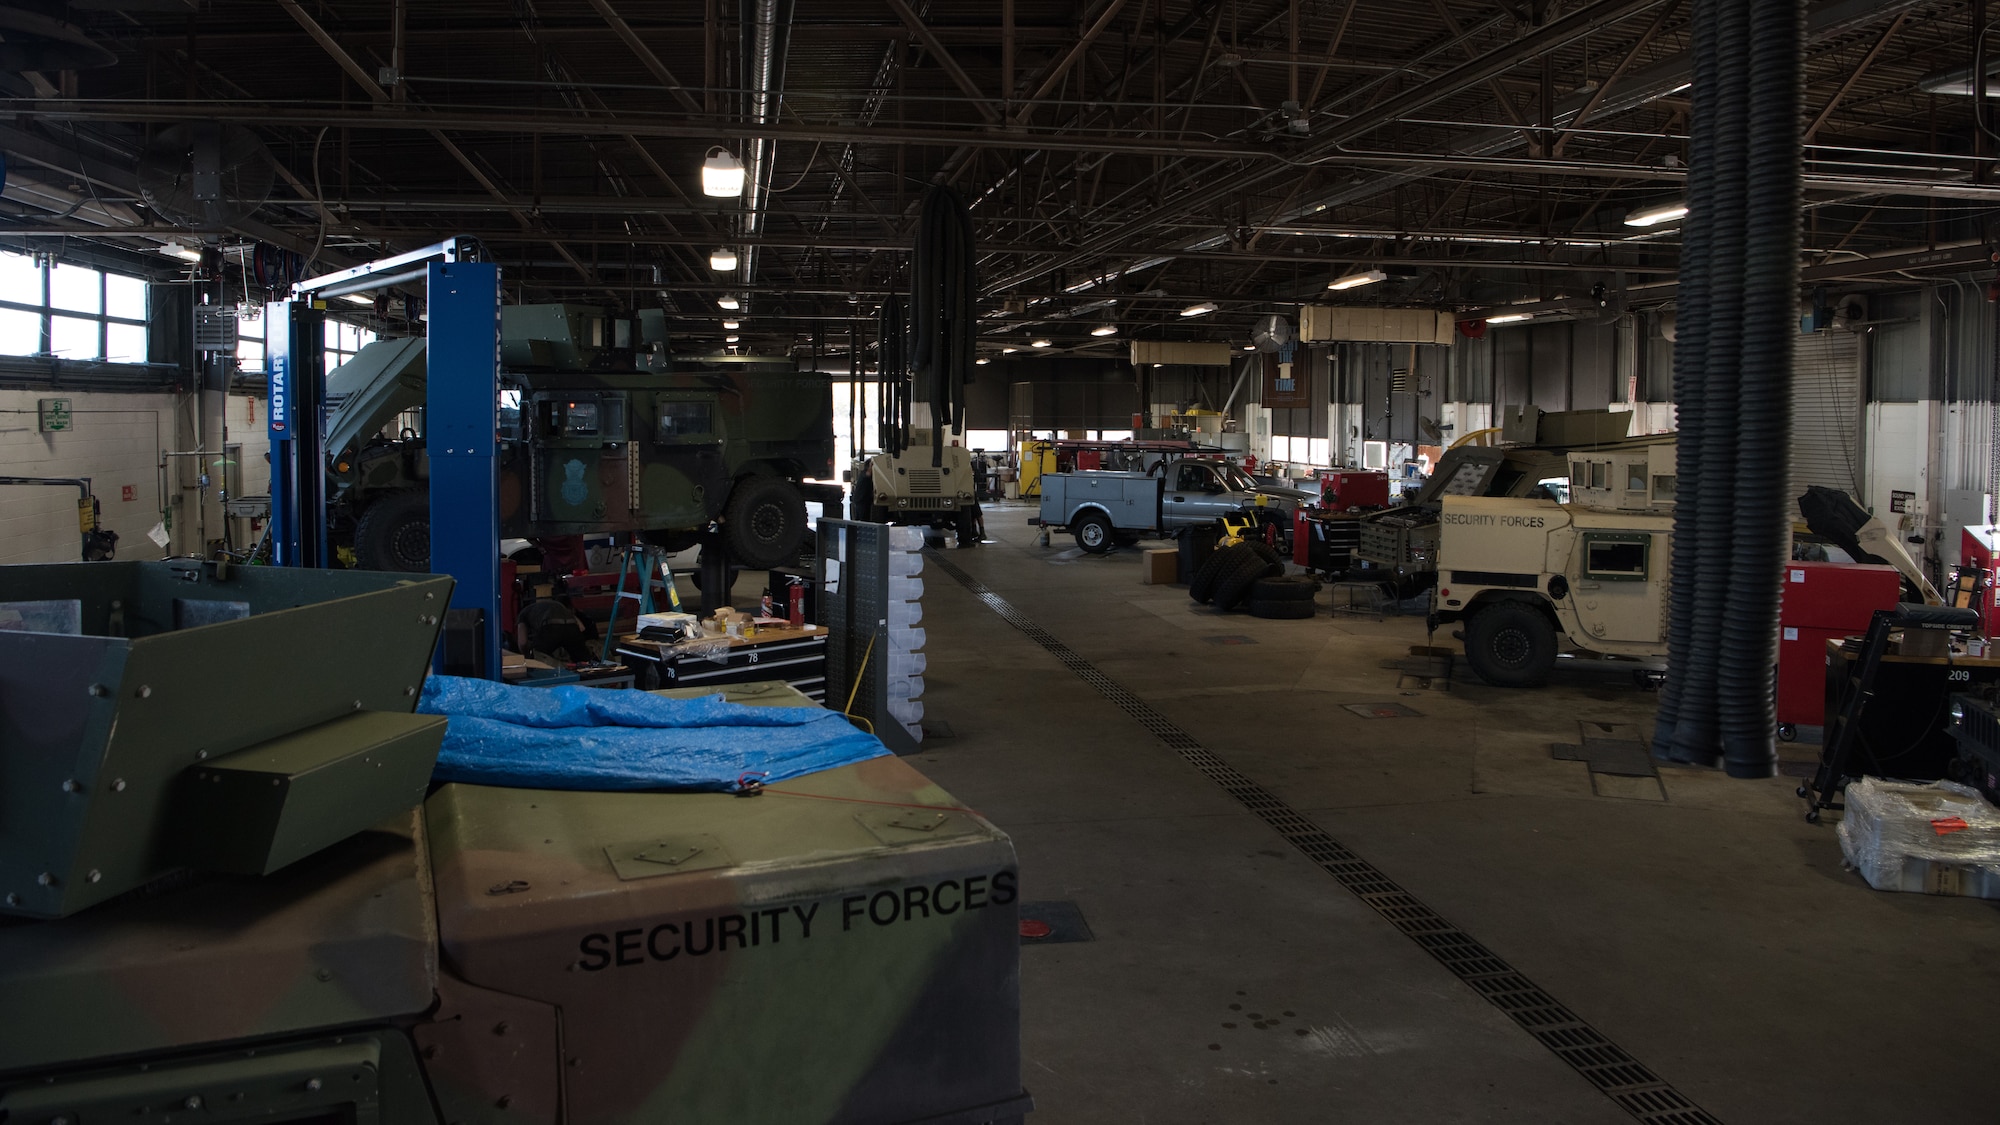 Vehicle maintenance technicians work on a variety of vehicles inside the low bay of vehicle maintenance.